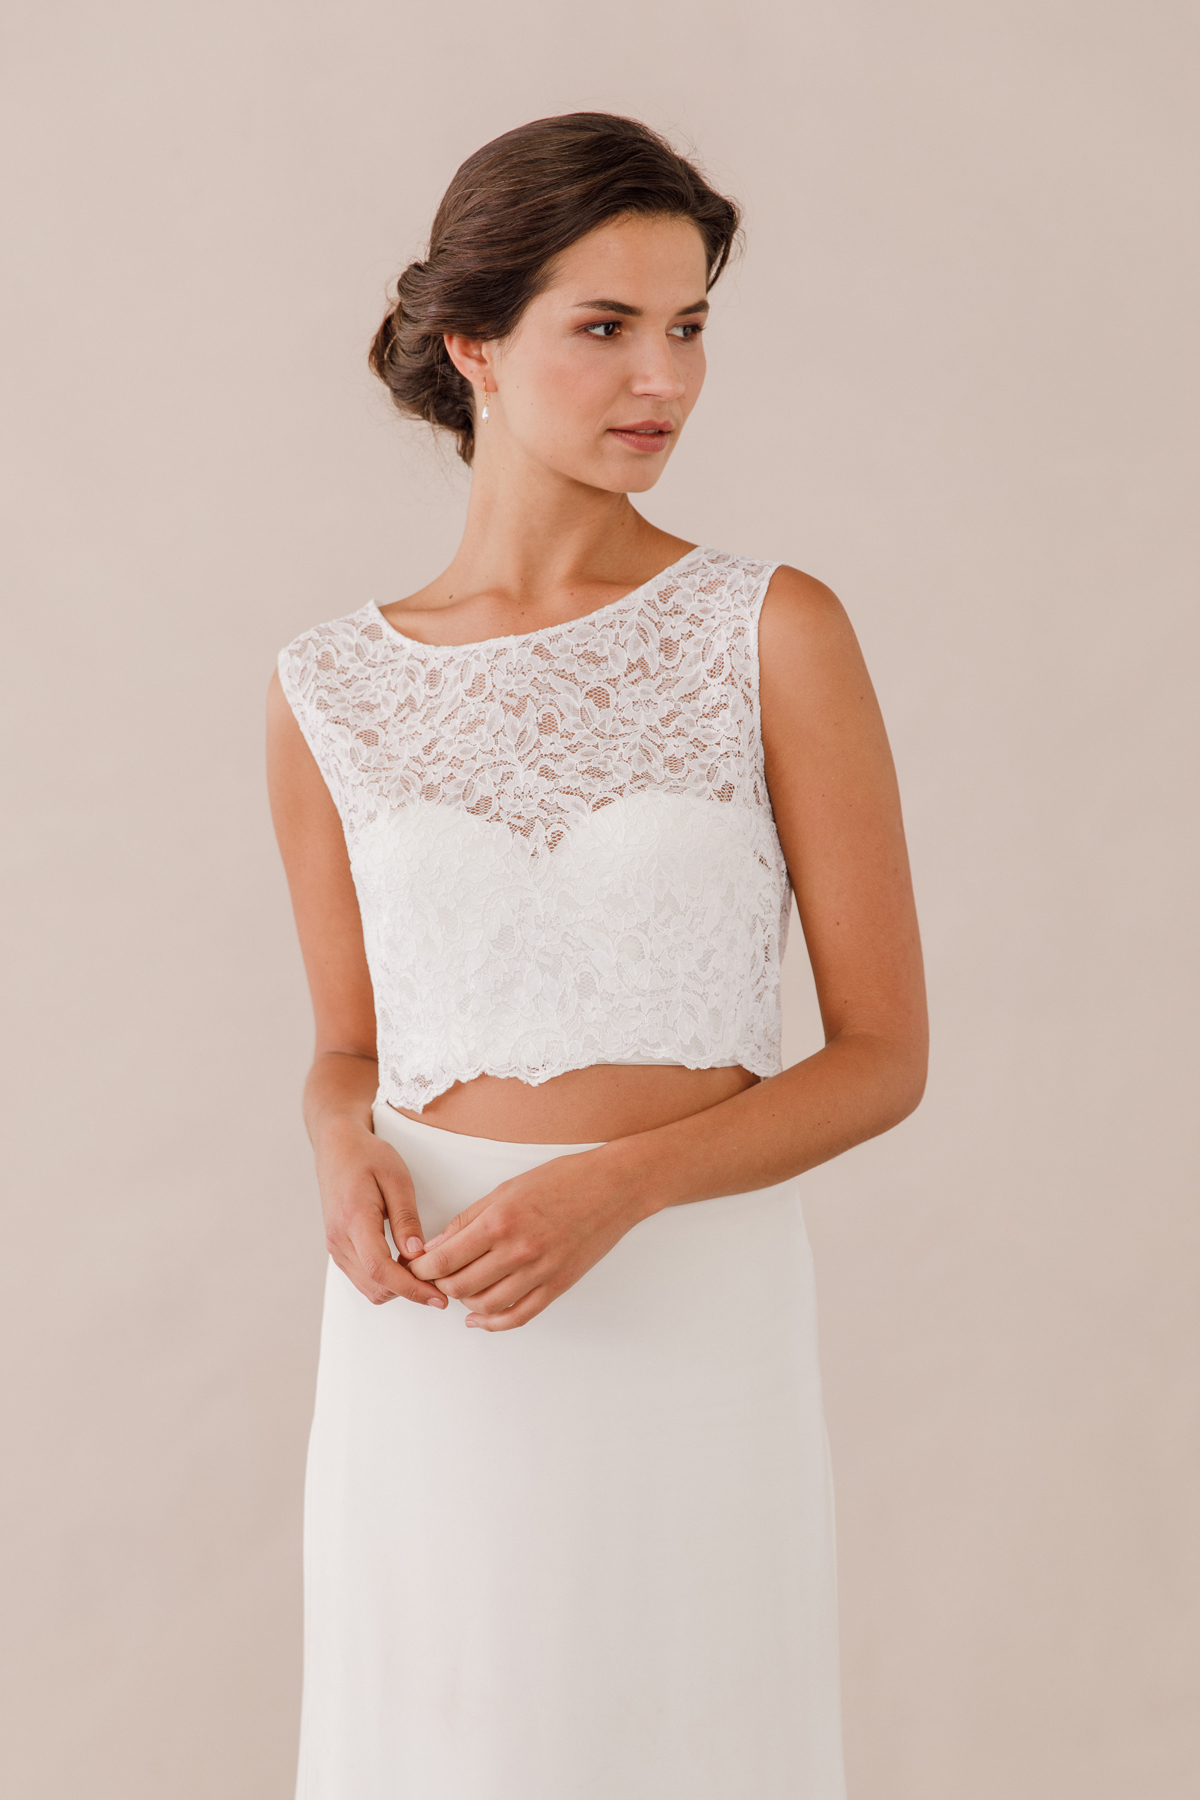 Penelope -lace bridal coverup with pearl buttons